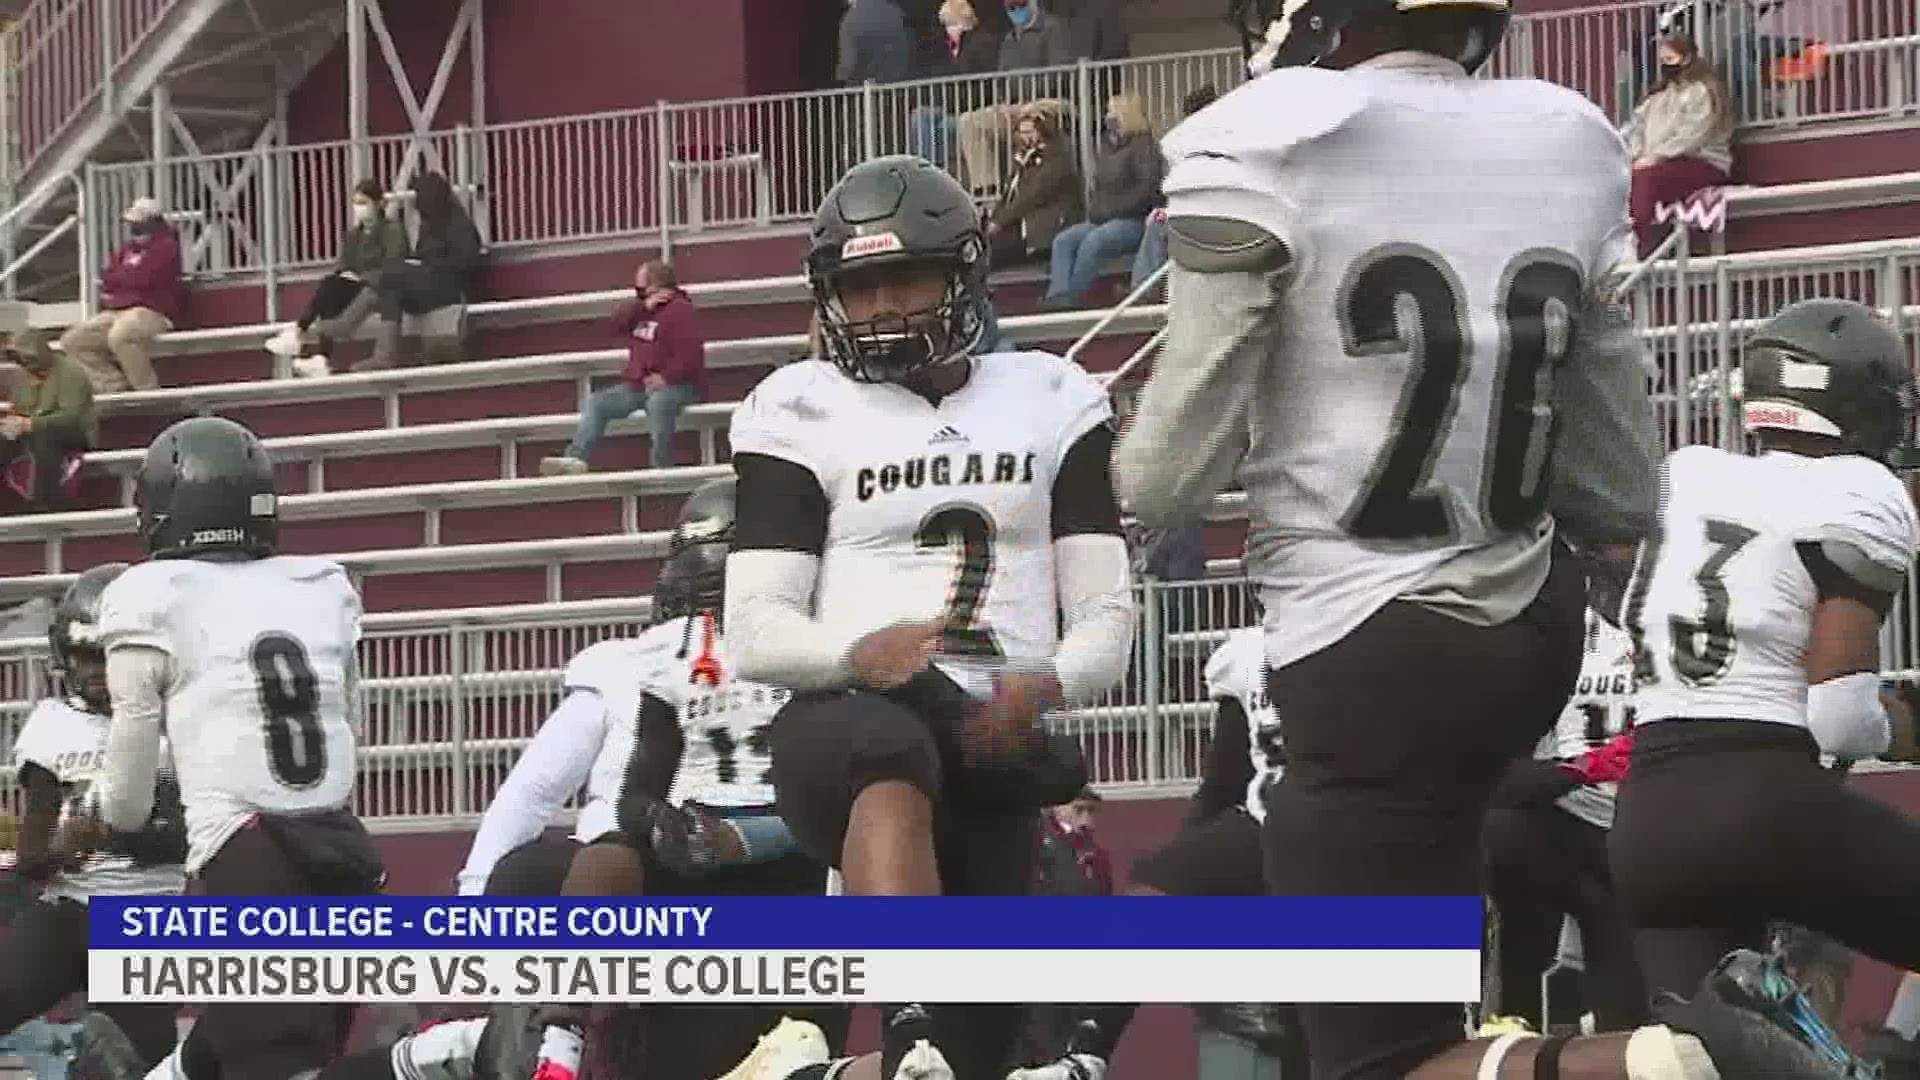 In under 24 hours, the Harrisburg Cougars and State College Little Lions set up and played a regular season game.